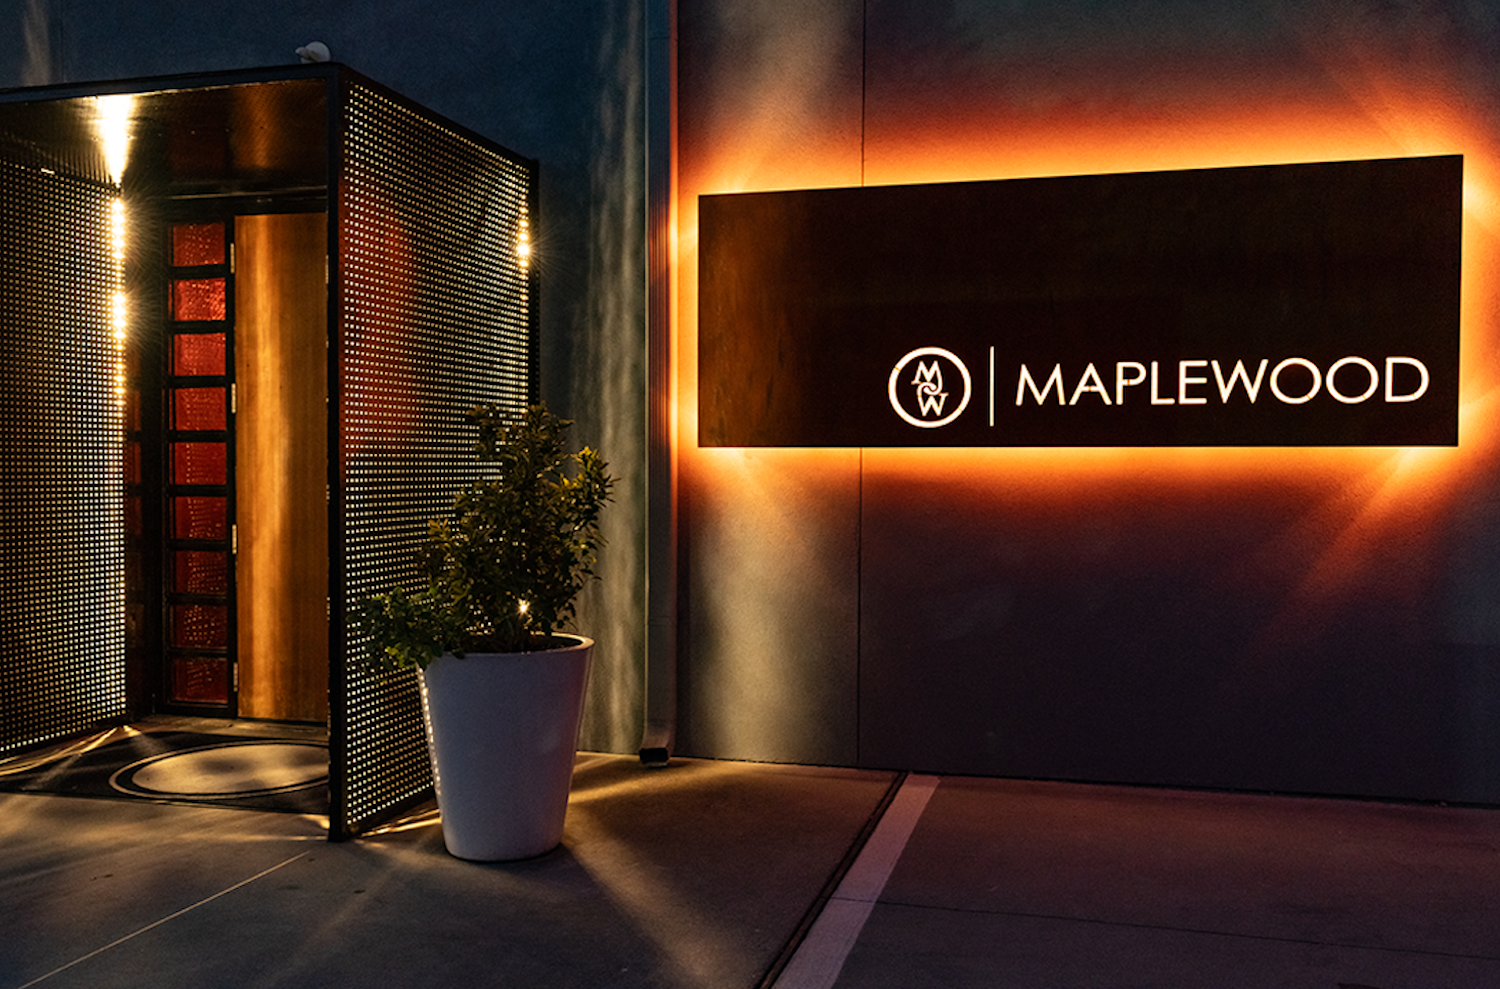 Sign that says "Maplewood" glowing in orange light at a door.